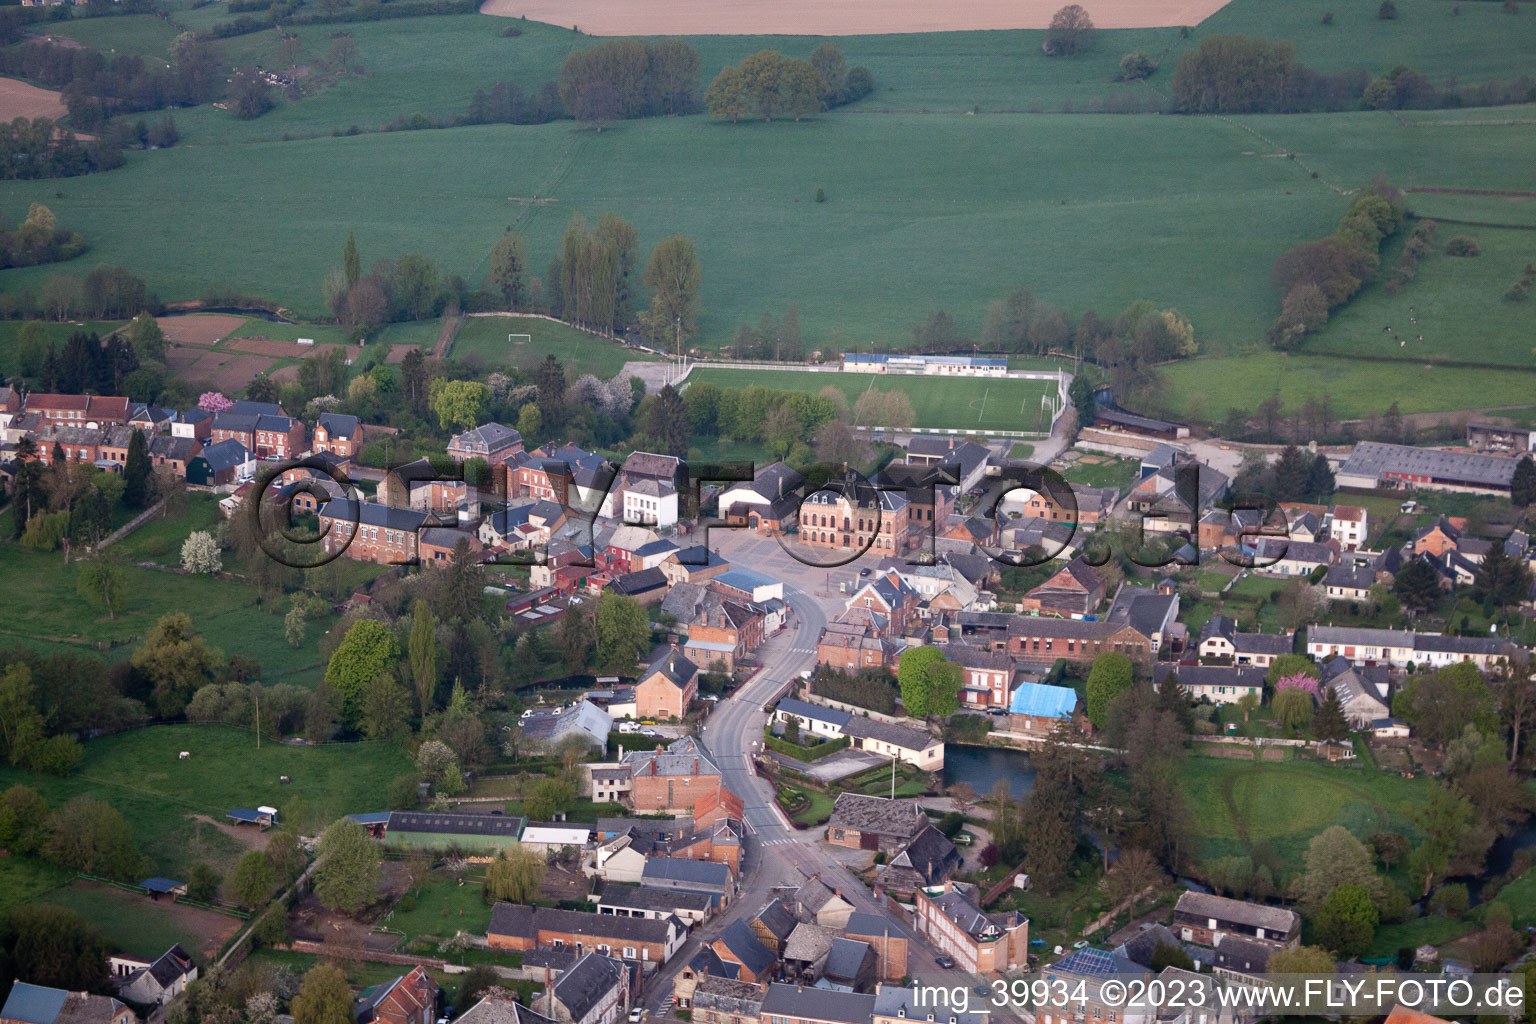 Origny-en-Thiérache in the state Aisne, France from above